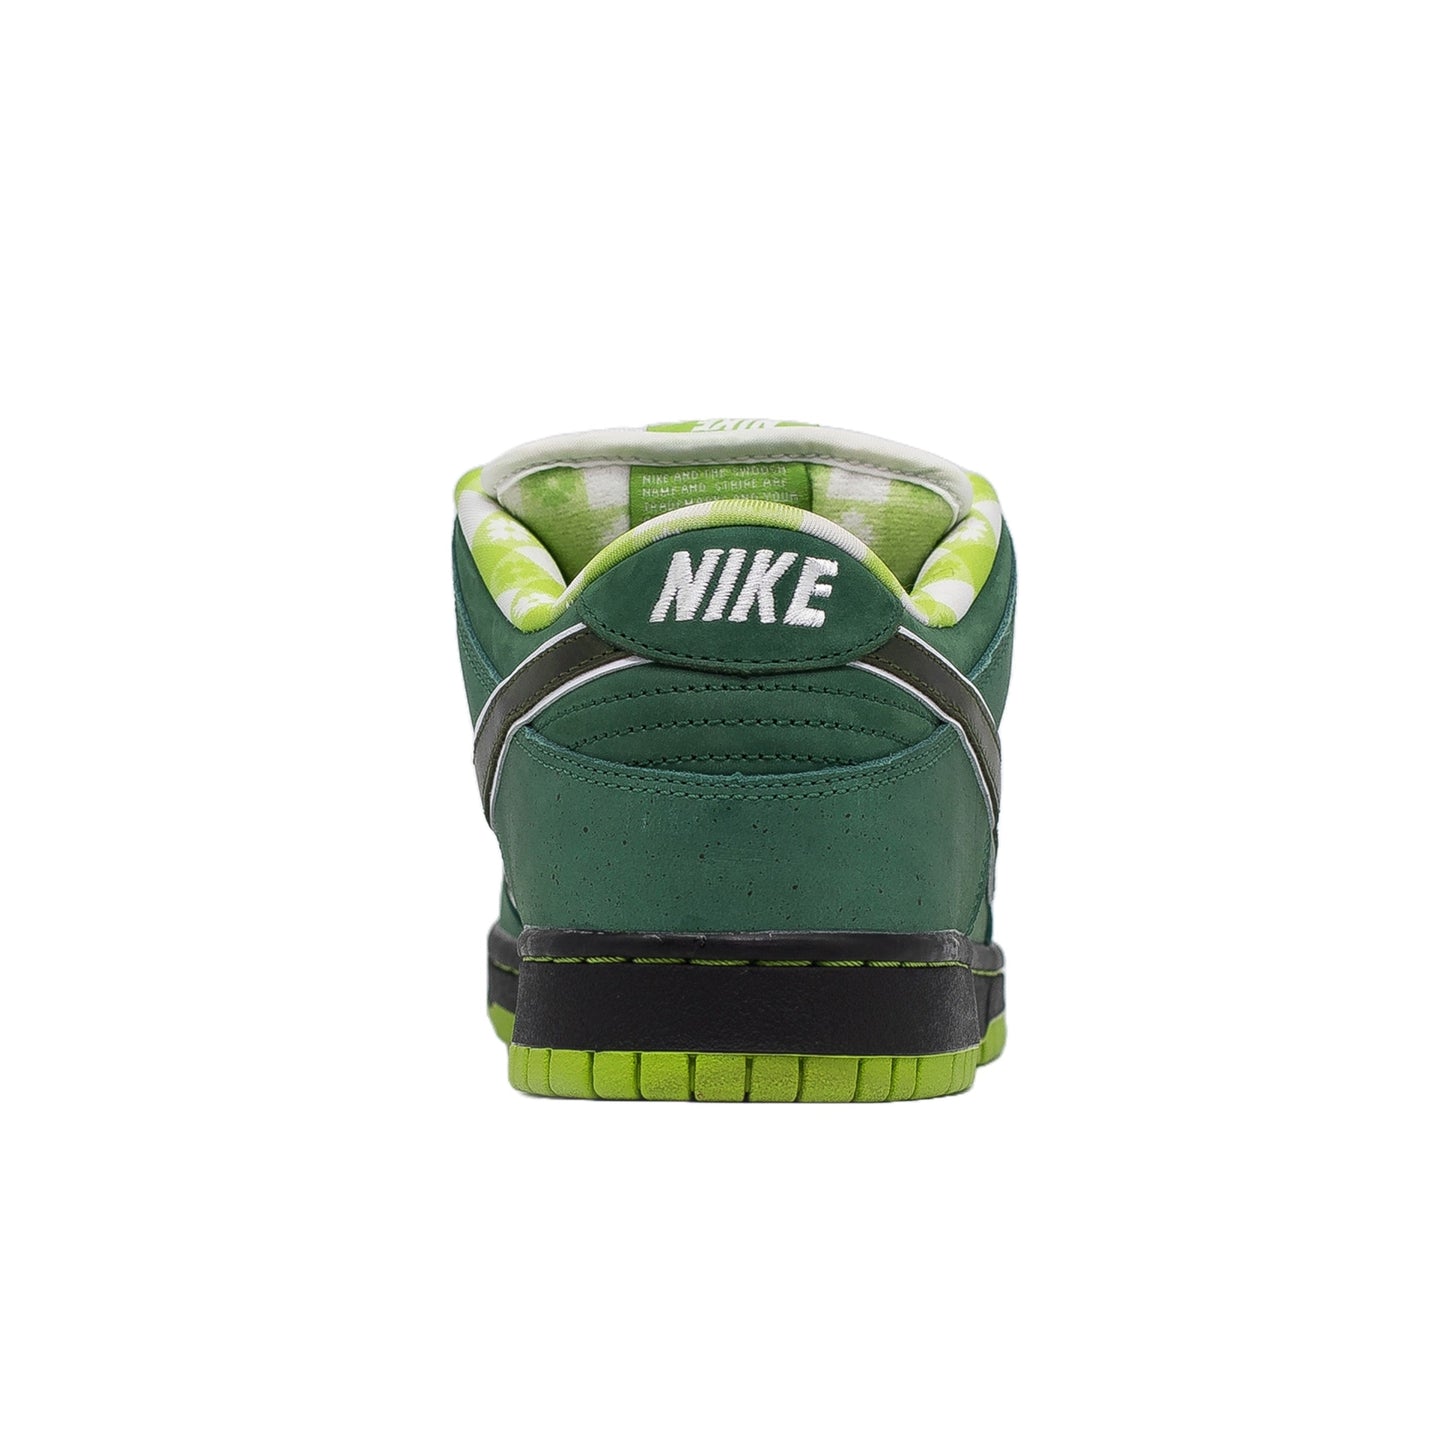 Nike SB Dunk Low, Concepts Green Lobster